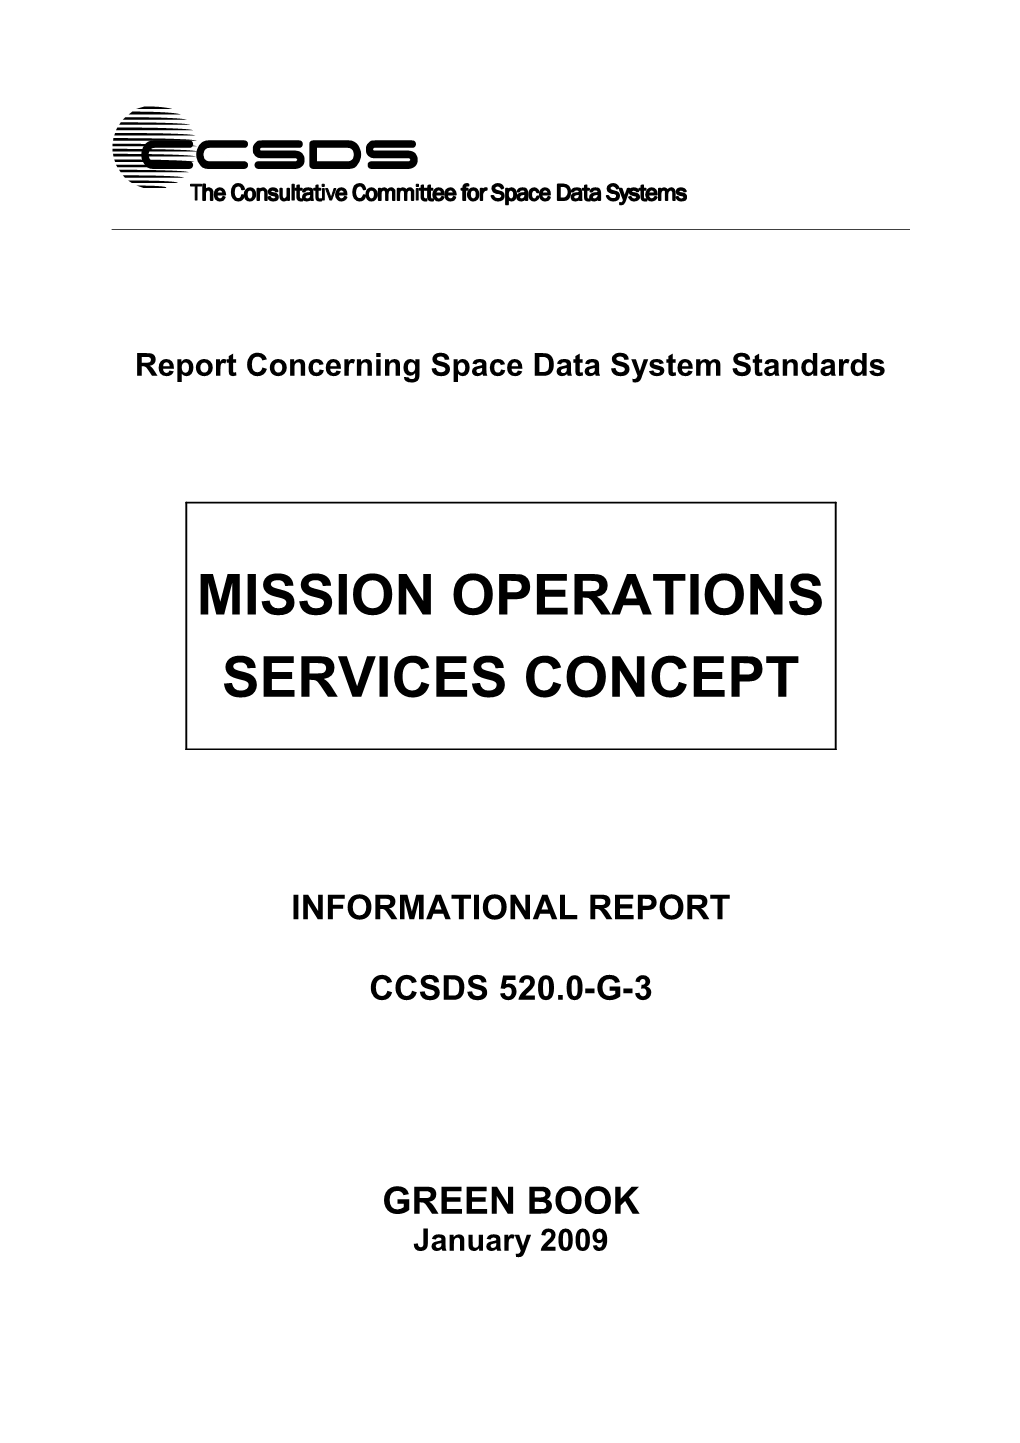 Mission Operations Services Concept